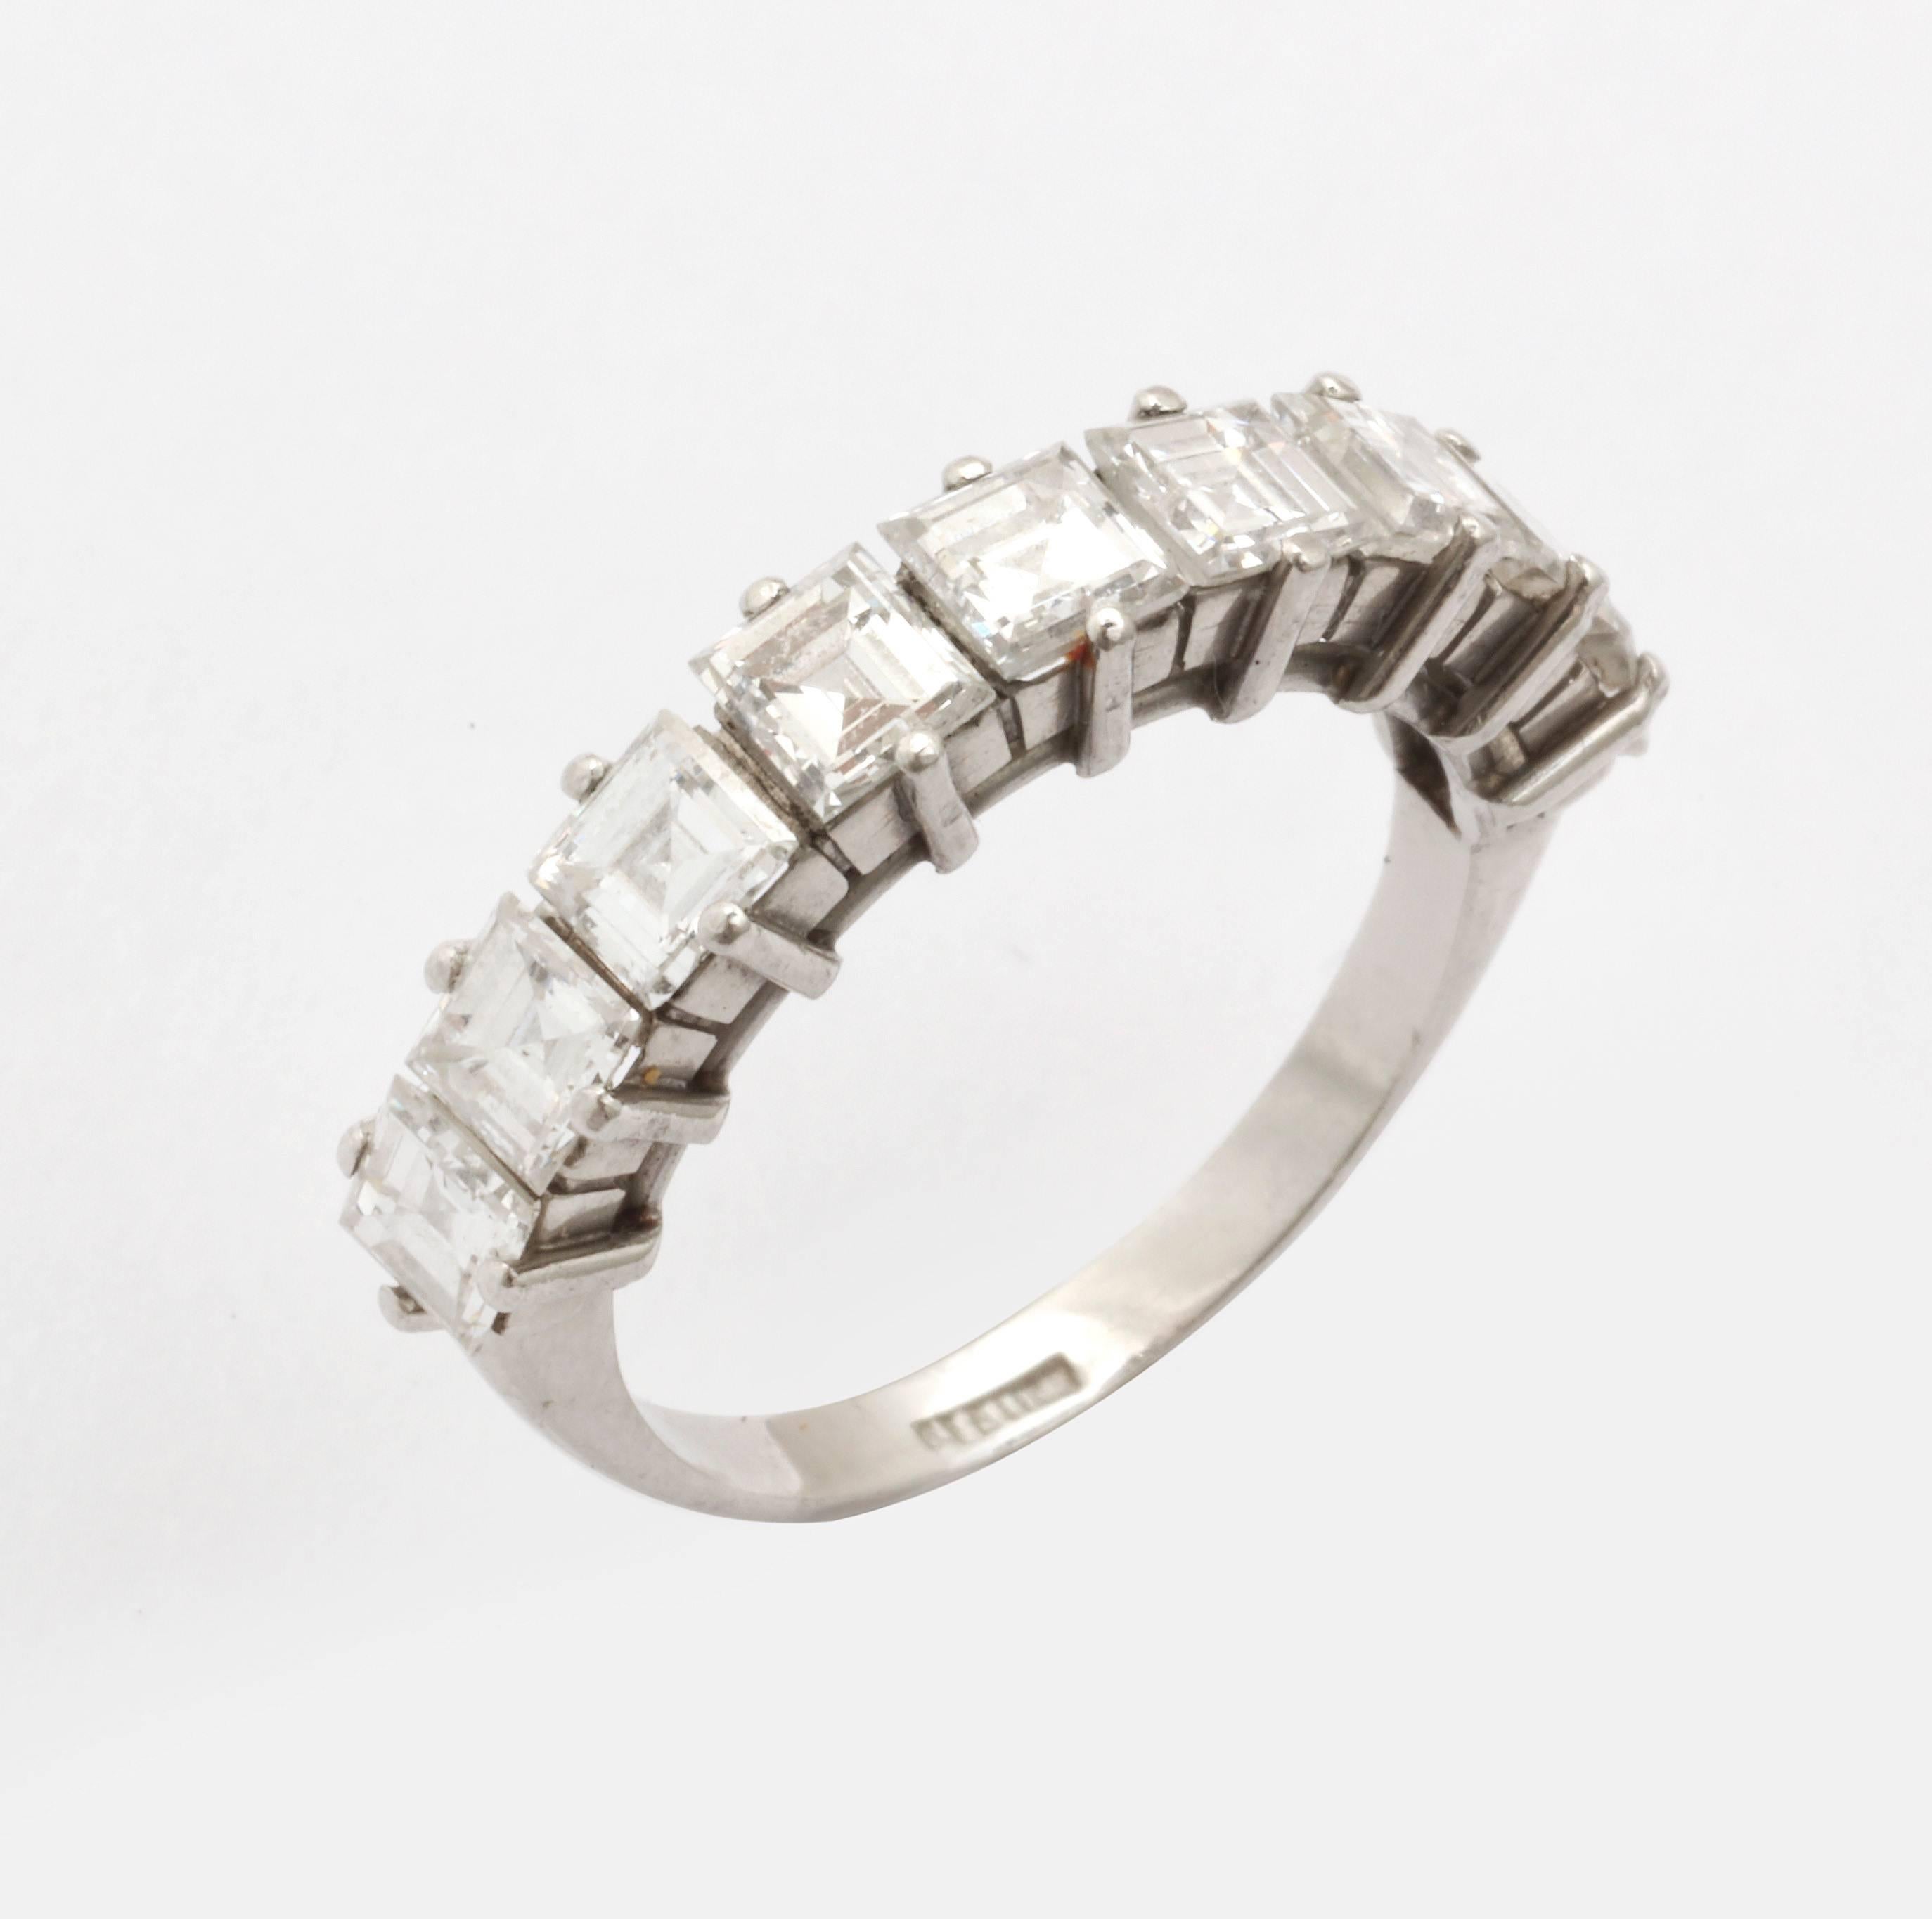 A fine two-thirds hoop eternity band ,in platinum, set with nine square cut white diamonds of .25 carats each, total of 2.25 carats (F-G color; VS clarity.. The makers mark is unclear. The band can be sized. It is currently size 6.  Perfect